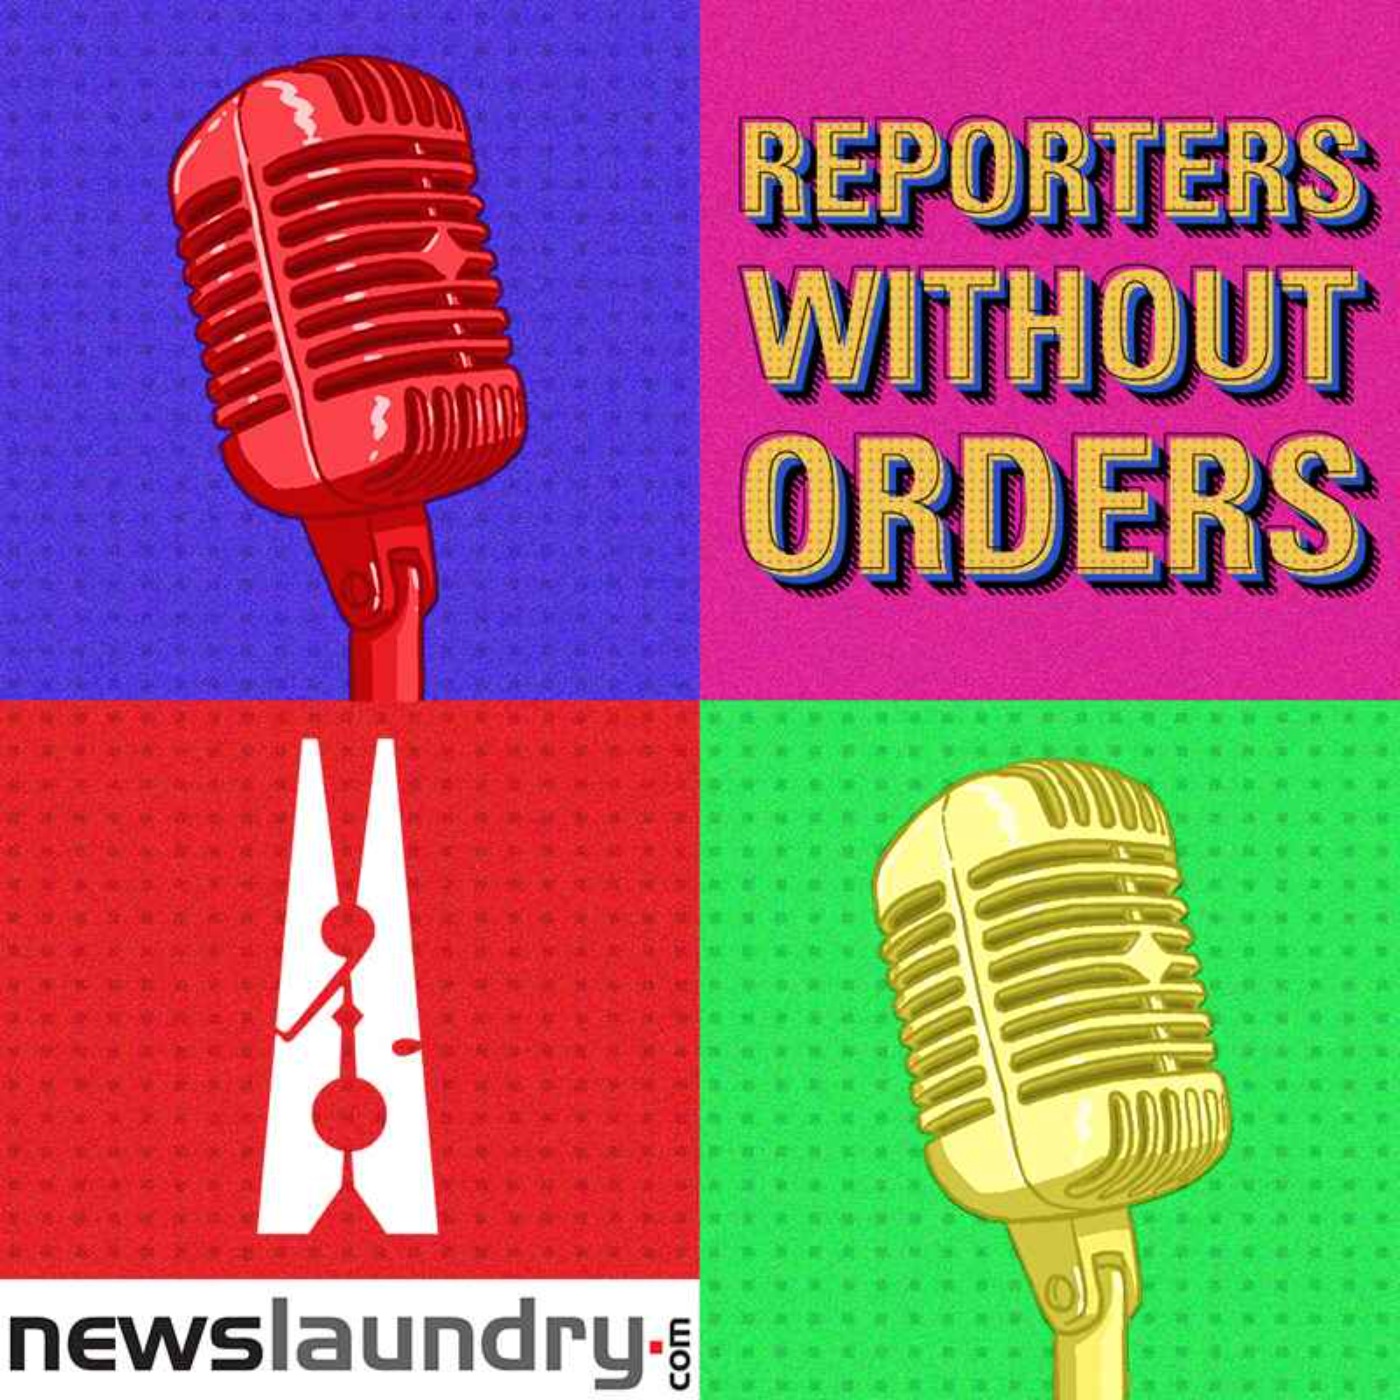 Reporters Without Orders Ep 293: Crisis for NGOs, Rajasthan politics